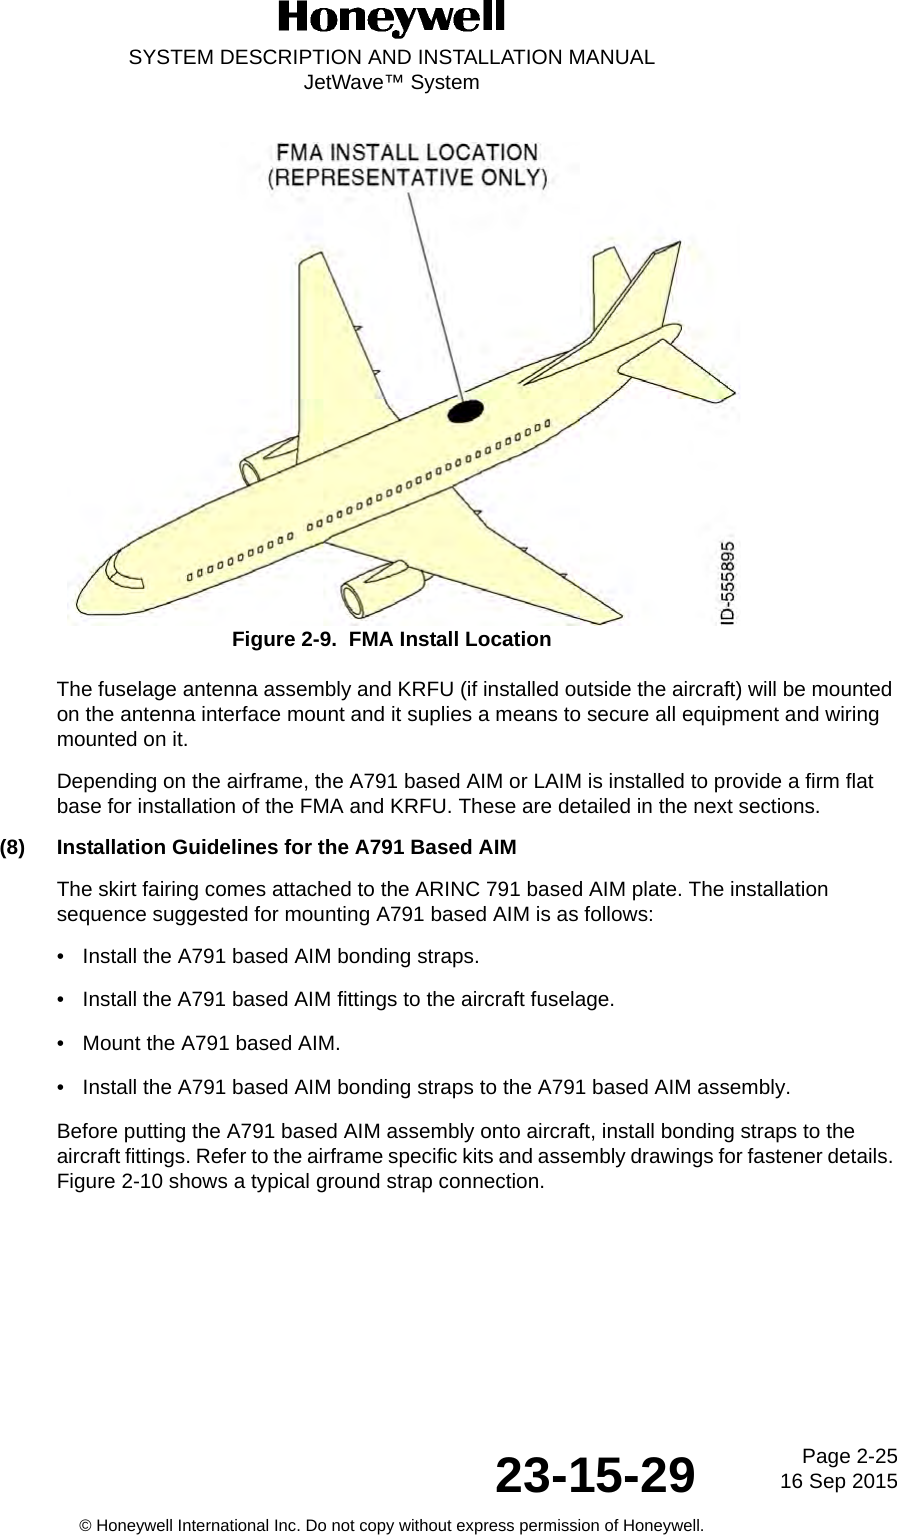 Page 2-25 16 Sep 201523-15-29SYSTEM DESCRIPTION AND INSTALLATION MANUALJetWave™ System© Honeywell International Inc. Do not copy without express permission of Honeywell.Figure 2-9.  FMA Install LocationThe fuselage antenna assembly and KRFU (if installed outside the aircraft) will be mounted on the antenna interface mount and it suplies a means to secure all equipment and wiring mounted on it.Depending on the airframe, the A791 based AIM or LAIM is installed to provide a firm flat base for installation of the FMA and KRFU. These are detailed in the next sections. (8) Installation Guidelines for the A791 Based AIMThe skirt fairing comes attached to the ARINC 791 based AIM plate. The installation sequence suggested for mounting A791 based AIM is as follows:•Install the A791 based AIM bonding straps.• Install the A791 based AIM fittings to the aircraft fuselage.• Mount the A791 based AIM.• Install the A791 based AIM bonding straps to the A791 based AIM assembly.Before putting the A791 based AIM assembly onto aircraft, install bonding straps to the aircraft fittings. Refer to the airframe specific kits and assembly drawings for fastener details. Figure 2-10 shows a typical ground strap connection. 